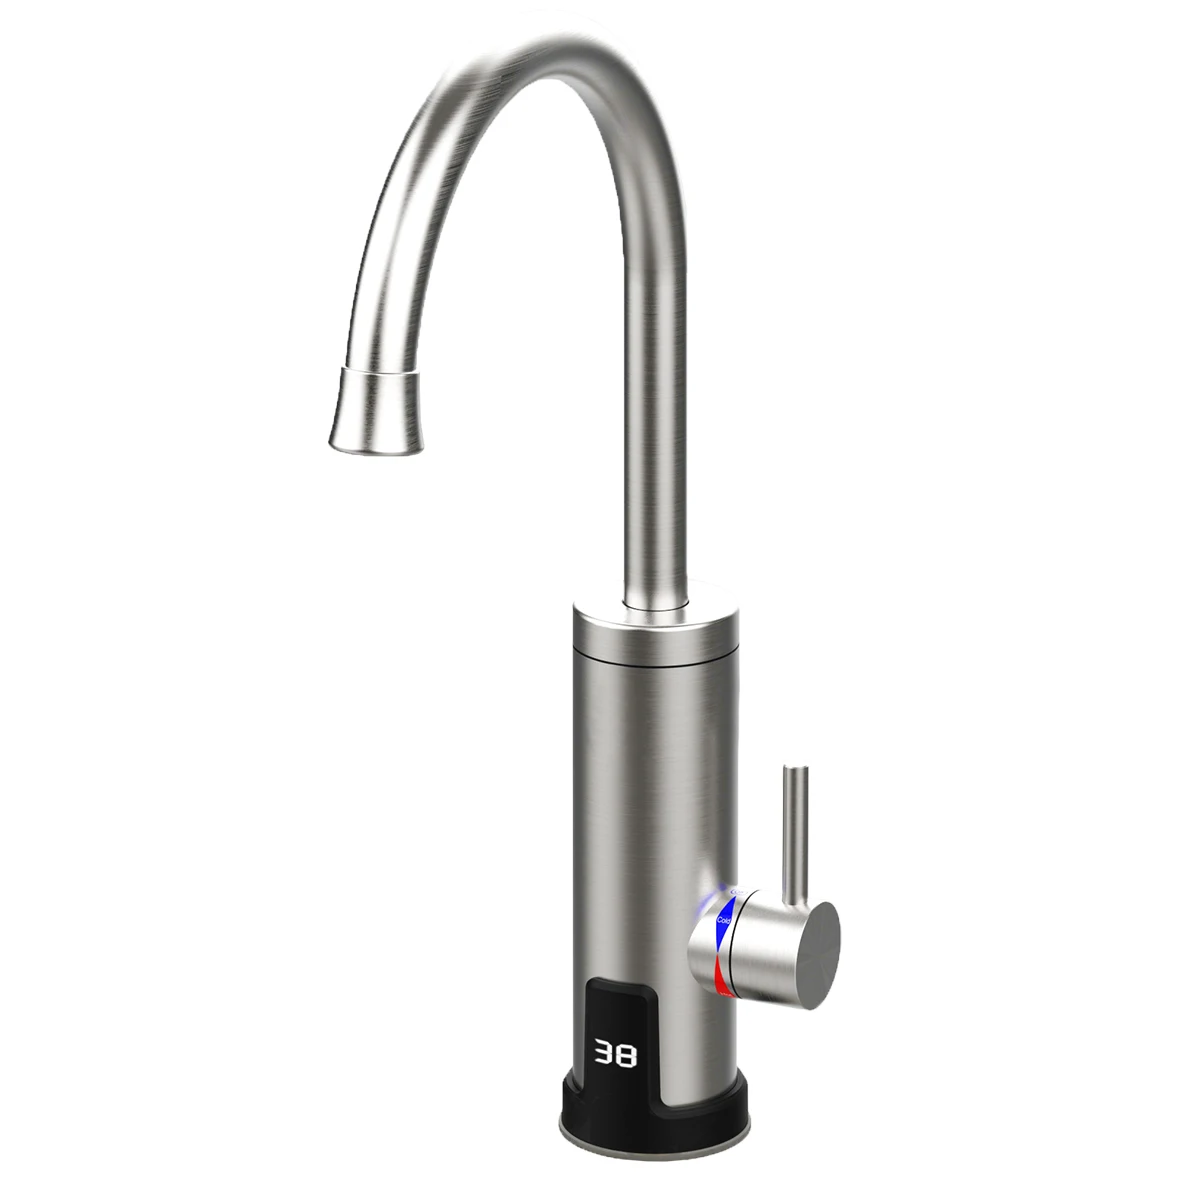 
Multifunctional 304 Stainless Steel Electric Instant Heating Water Faucet For instant hot water tap  (1600249736561)